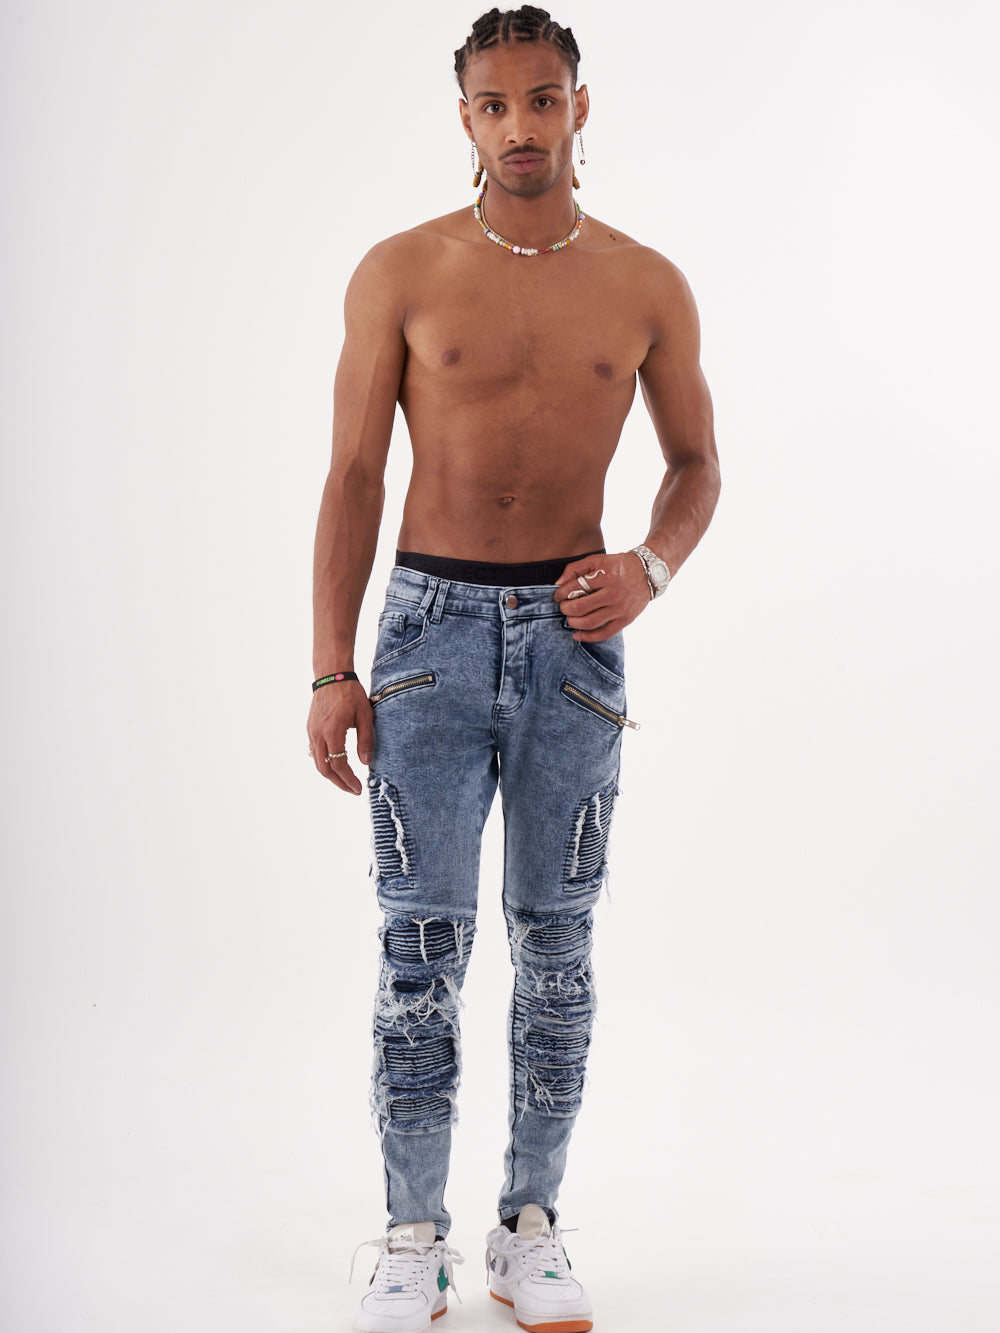 A man in RADICAL jeans posing for a photo.